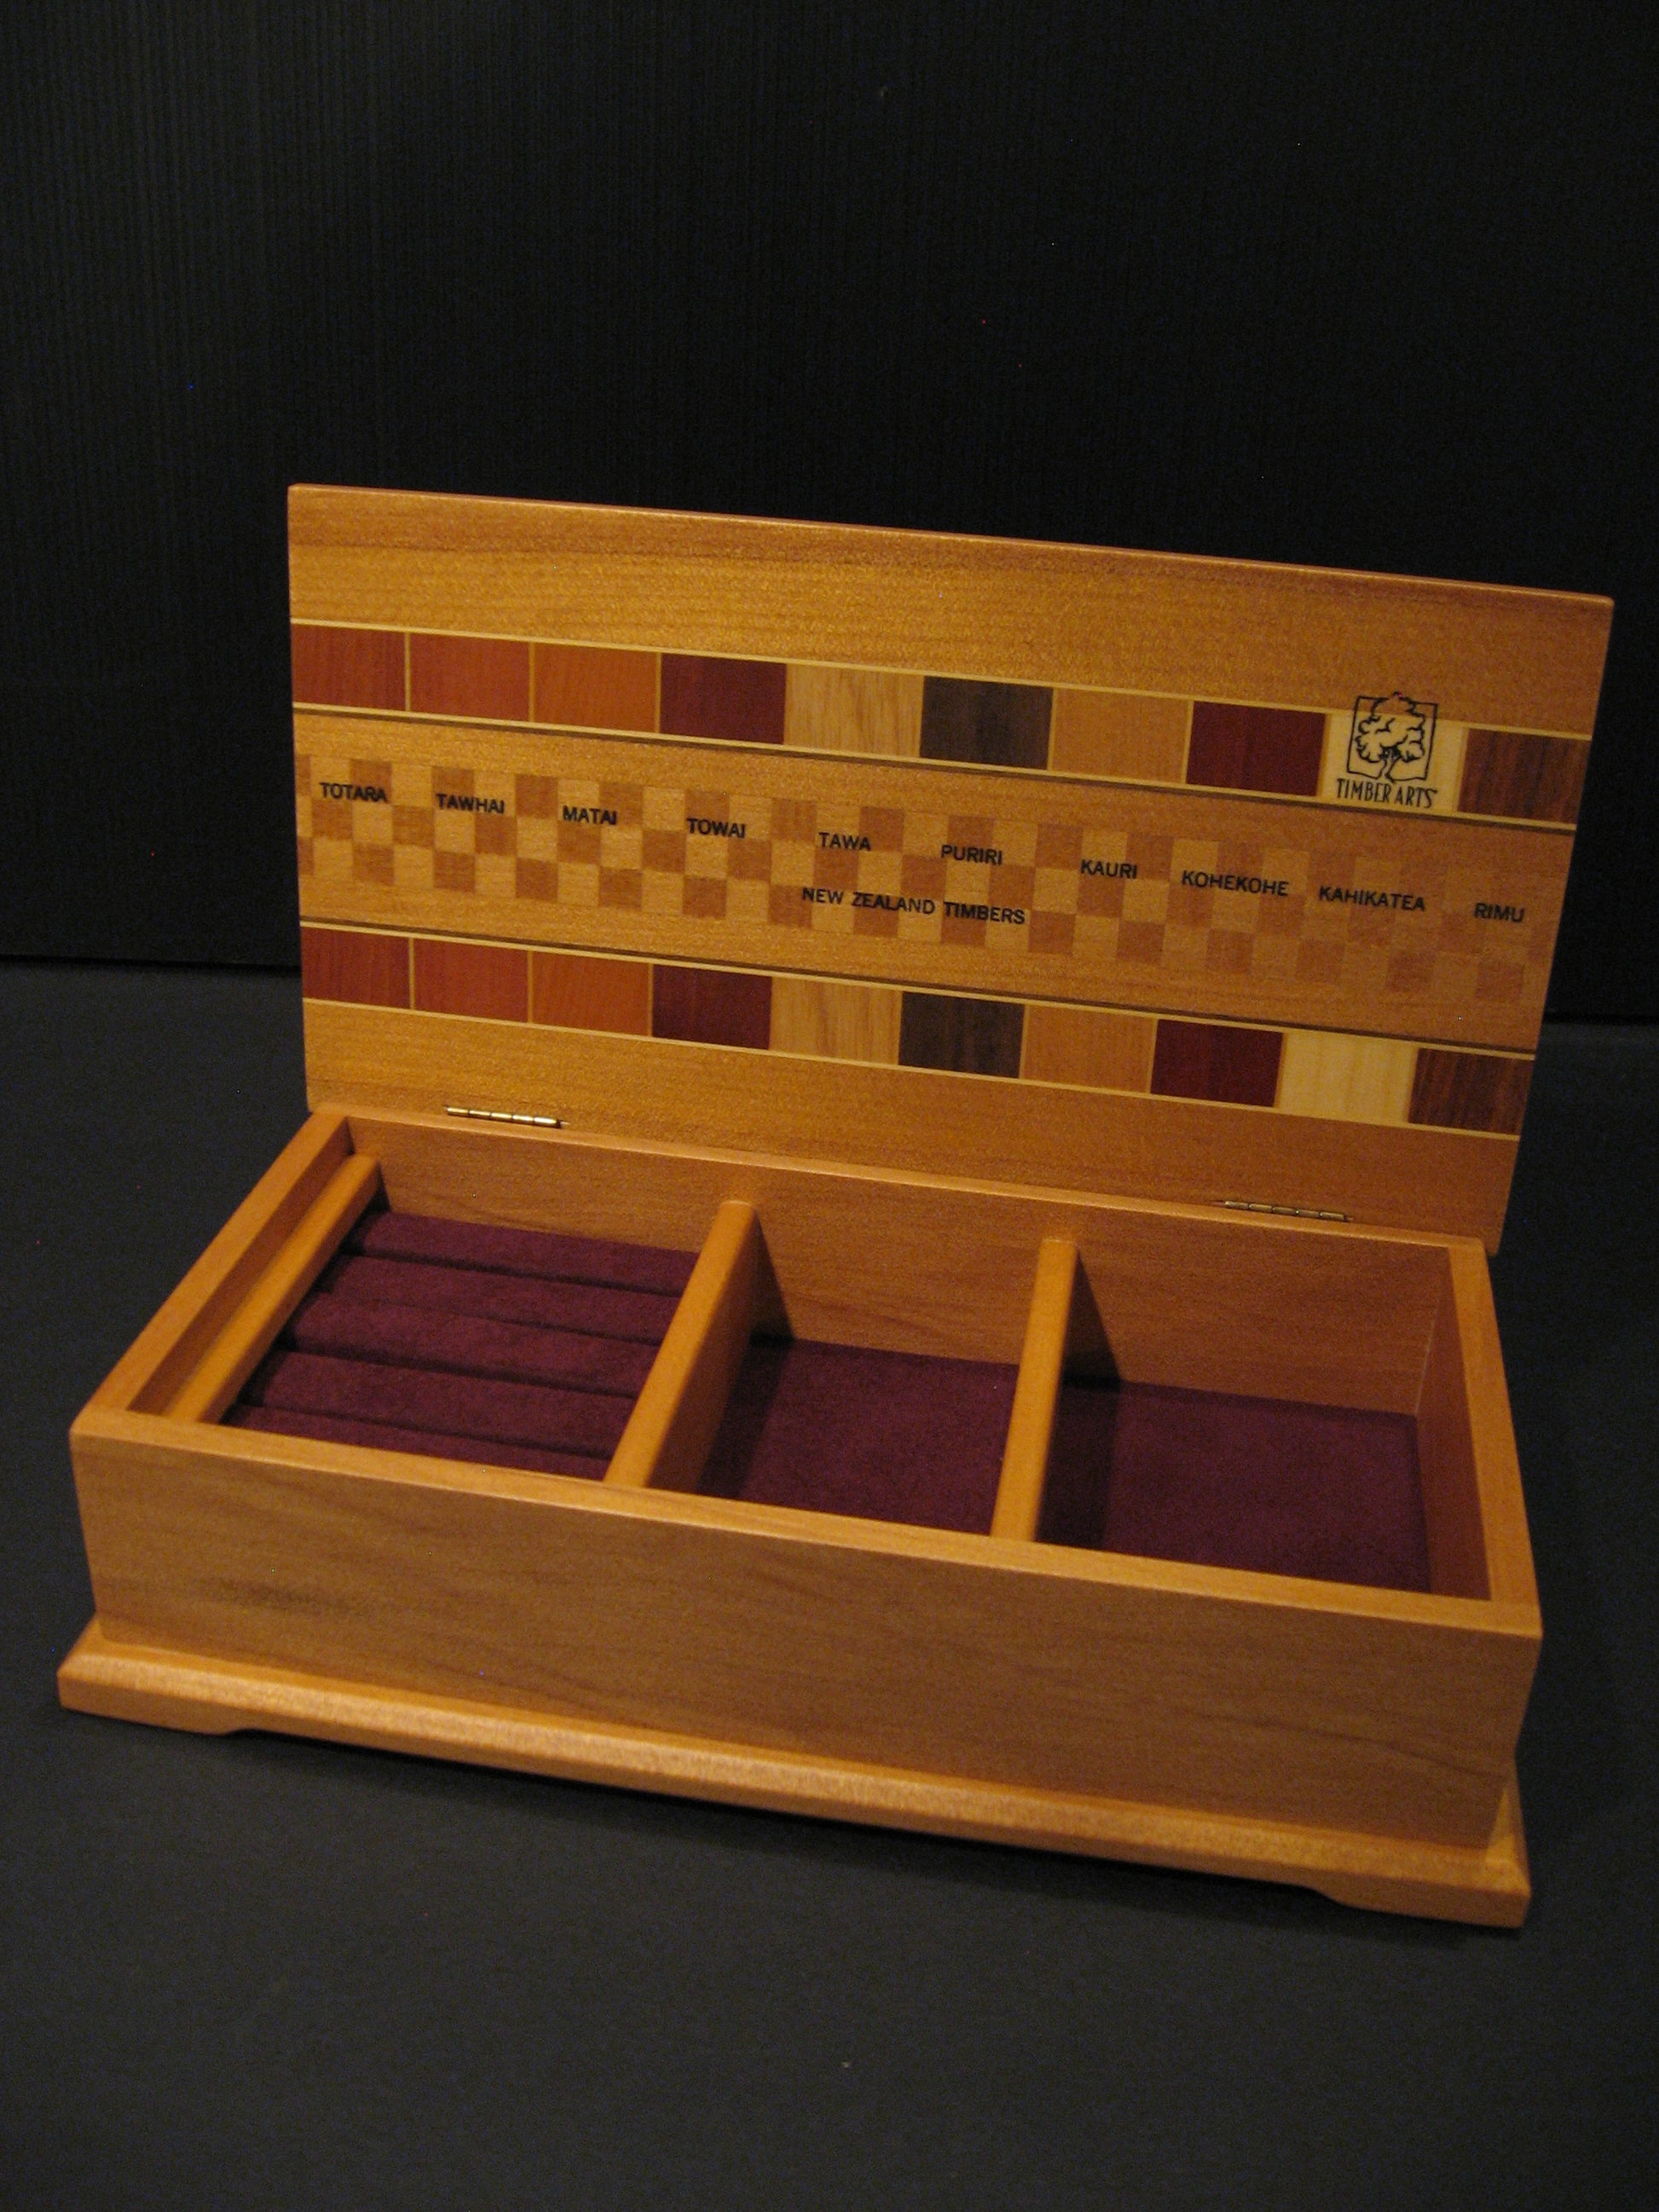 Inside Kauri Wood Jewellery Box Inlaid with Native Timbers by Timber Arts NZ Silver Fern Gallery